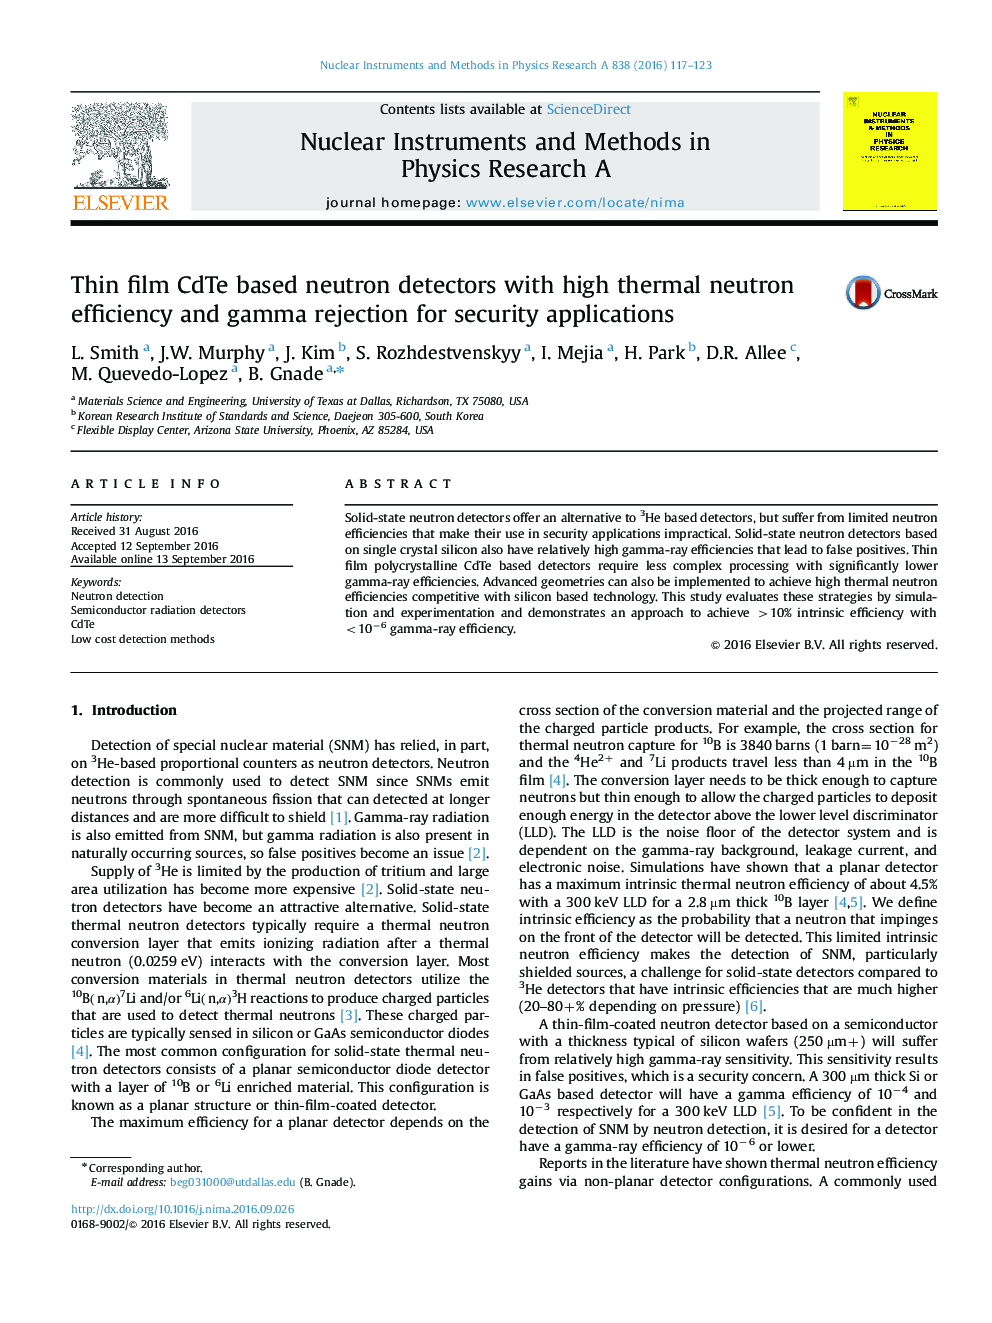 Thin film CdTe based neutron detectors with high thermal neutron efficiency and gamma rejection for security applications